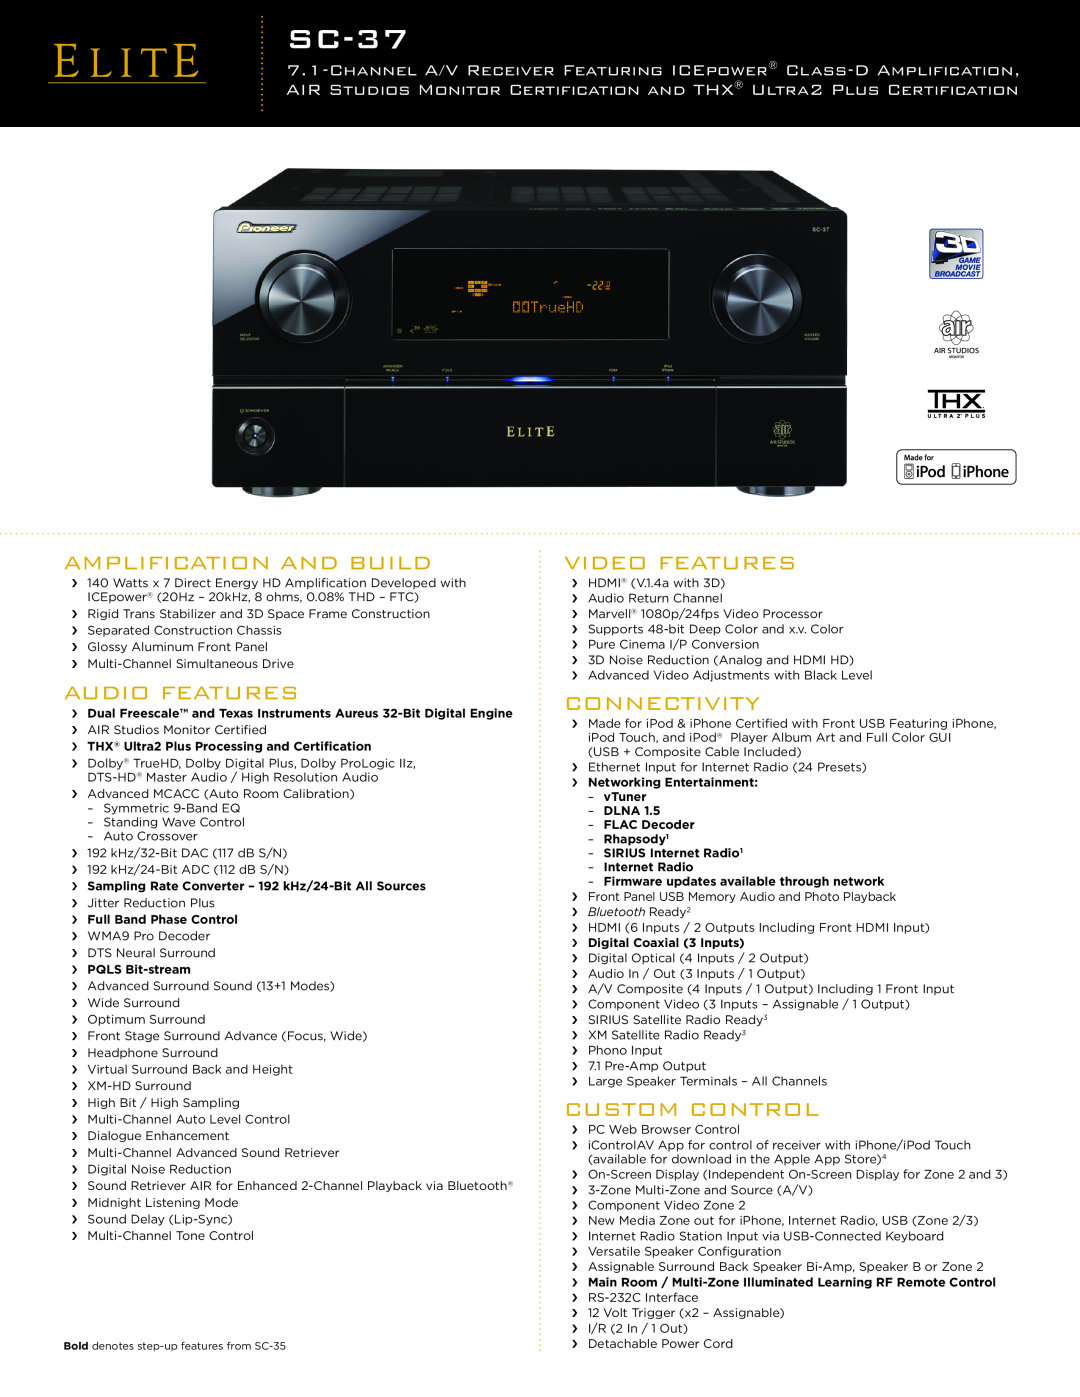 Pioneer SC-37 manual Amplification And Build, Audio Features, Video Features, Connectivity, Custom Control 